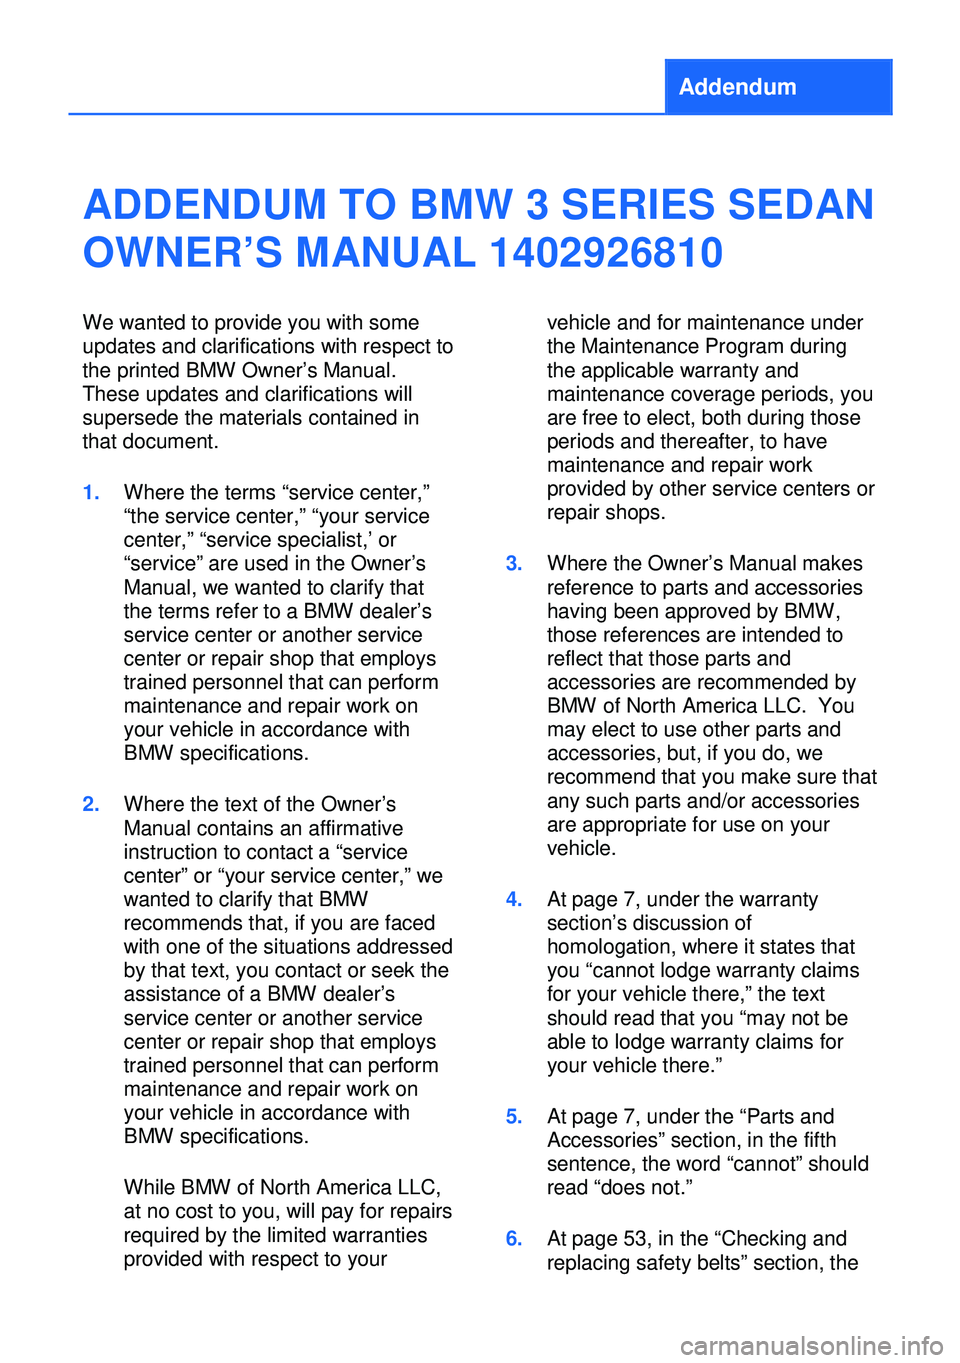 BMW 320i SEDAN 2013  Owners Manual Addendum
ADDENDUM TO BMW 3 SERIES SEDAN
OWNER’S MANUAL 1402926810
We wanted to provide you with some
updates and clarifications with respect to
the printed BMW Owner’s Manual.
These updates and cl